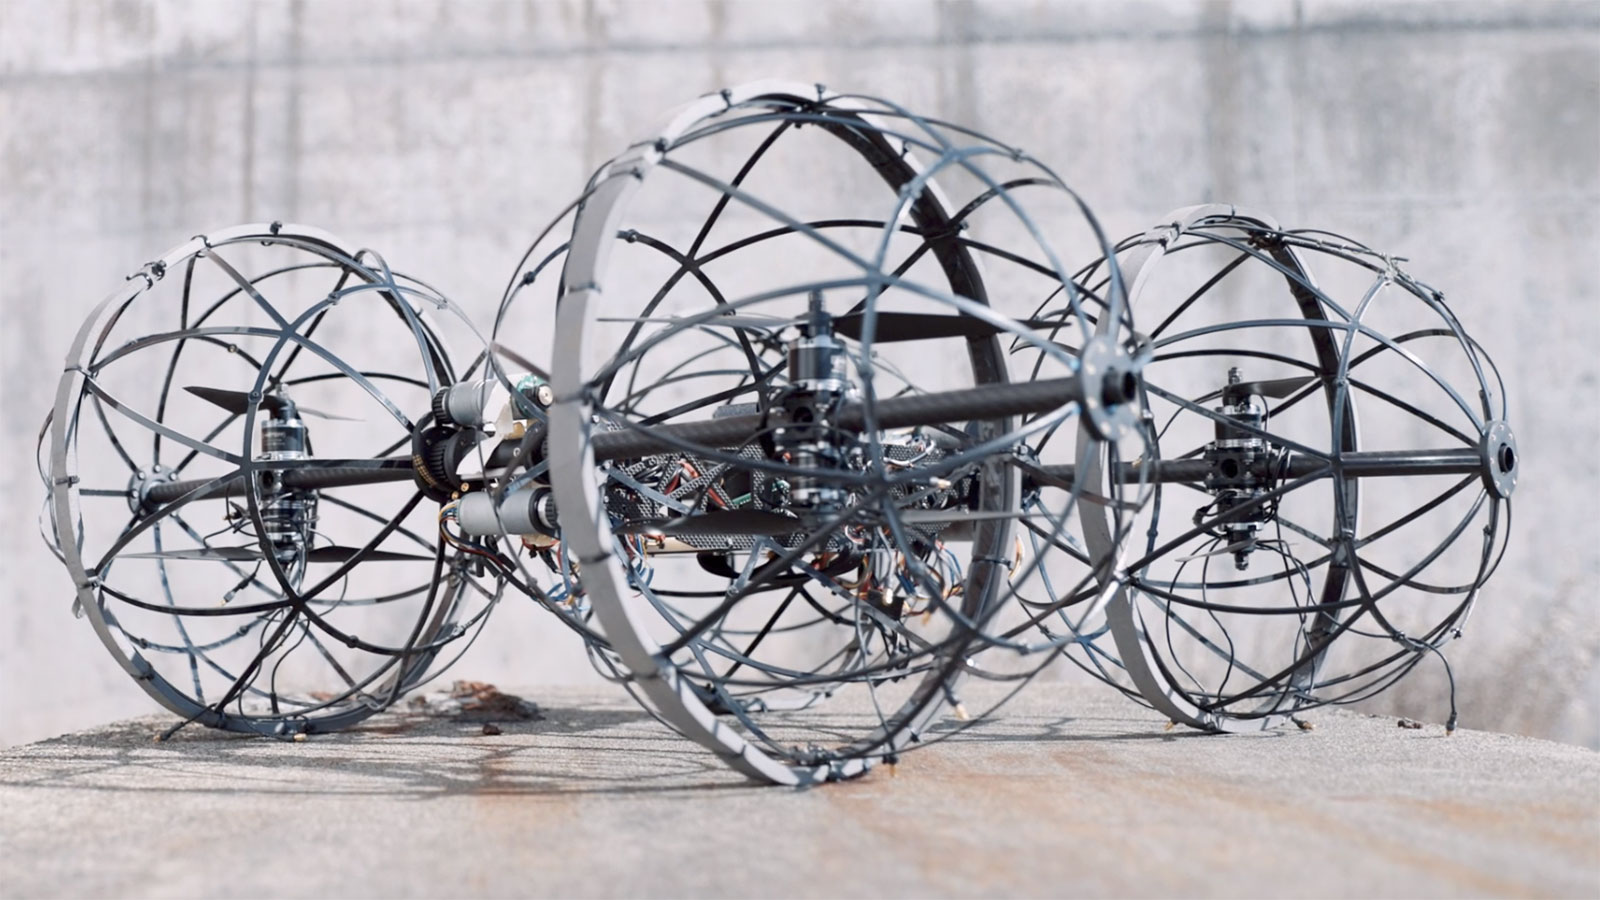 Team CoSTAR brought a rolling/flying robot called Drivocopter 